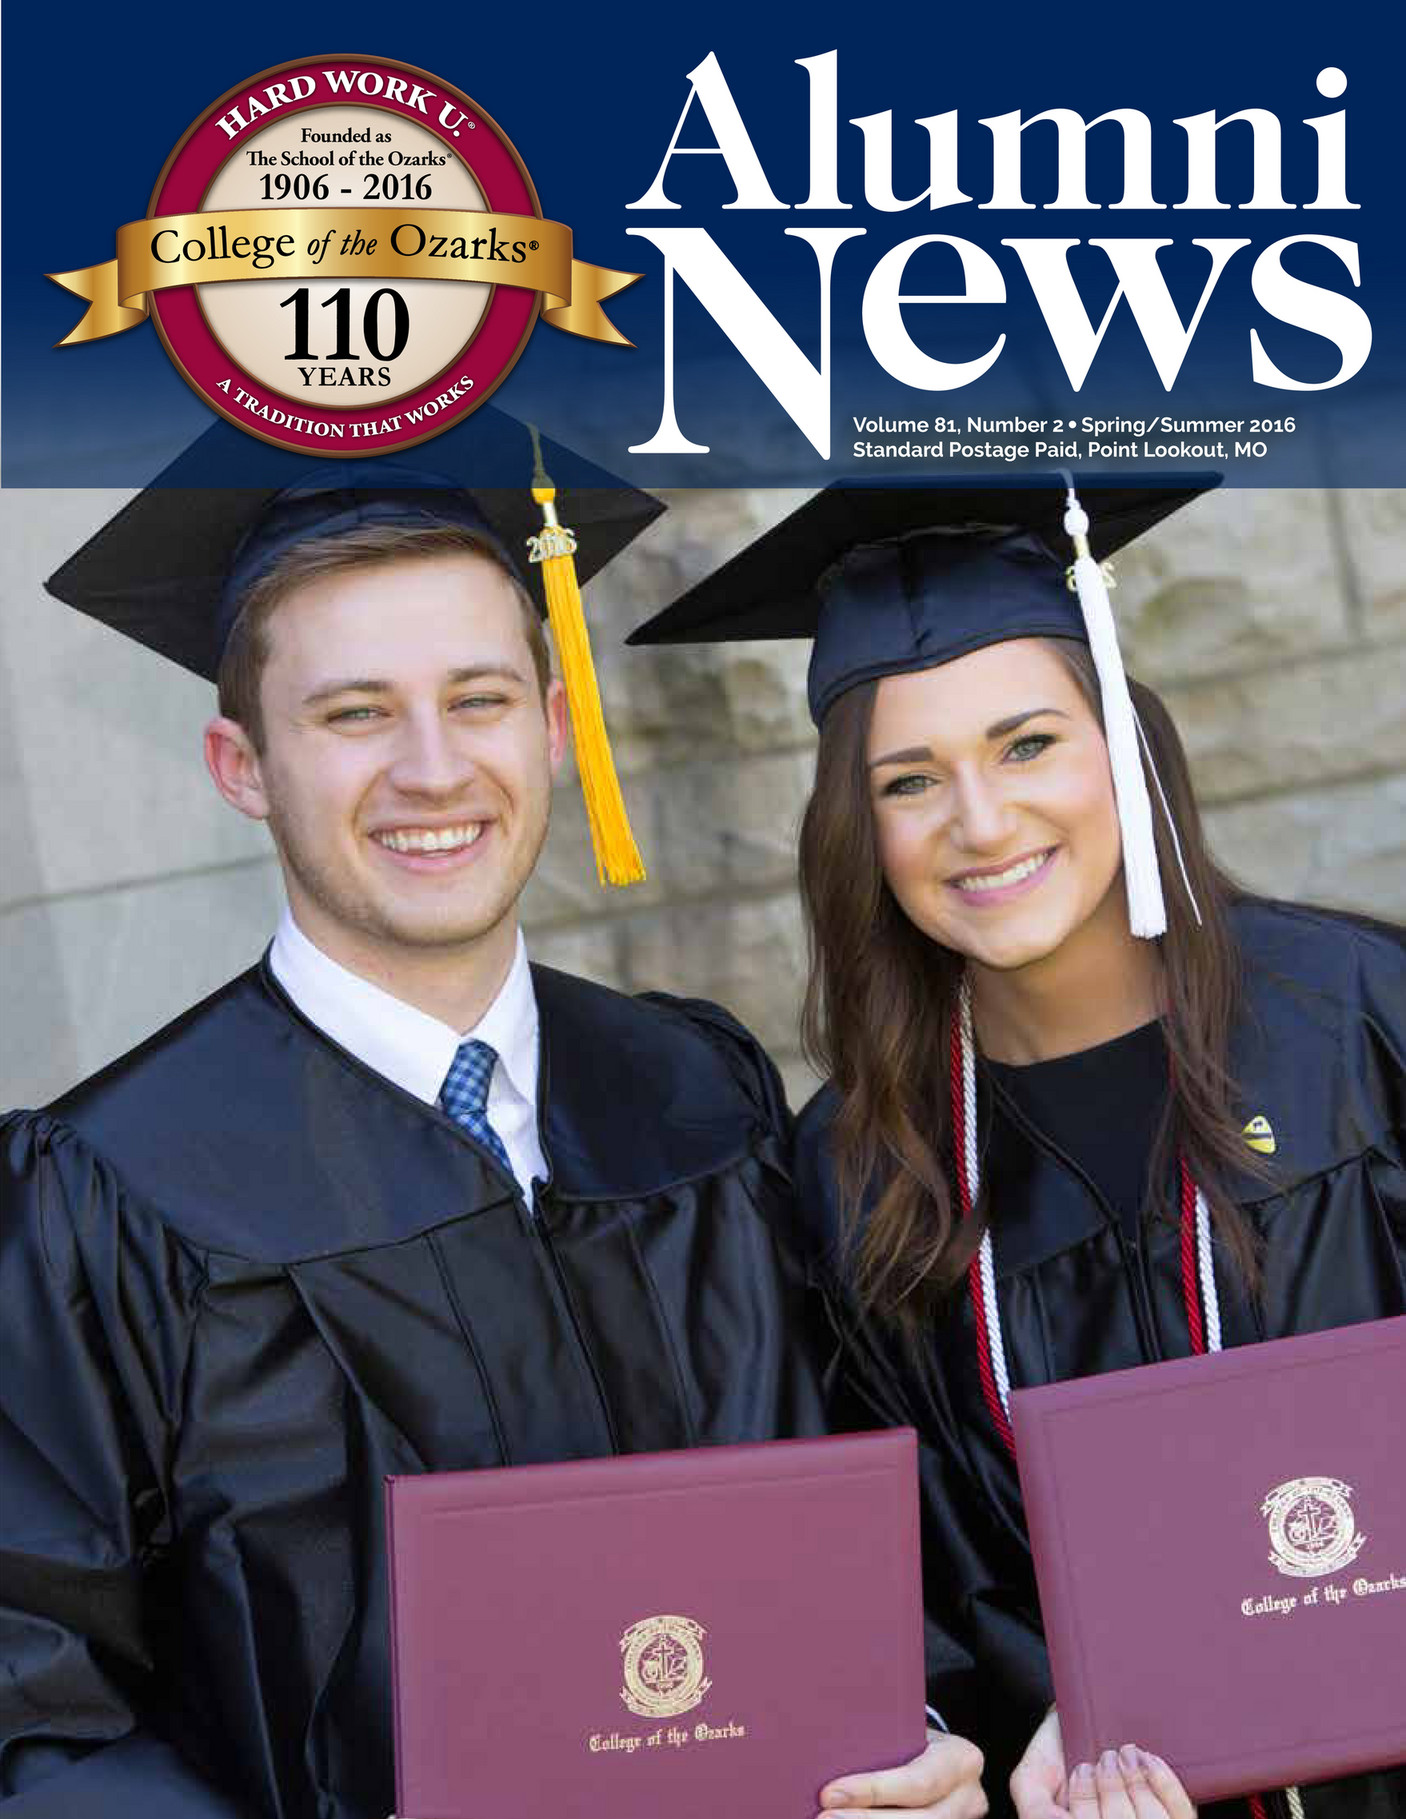 college-of-the-ozarks-spring-summer-2016-alumni-news-page-2-3